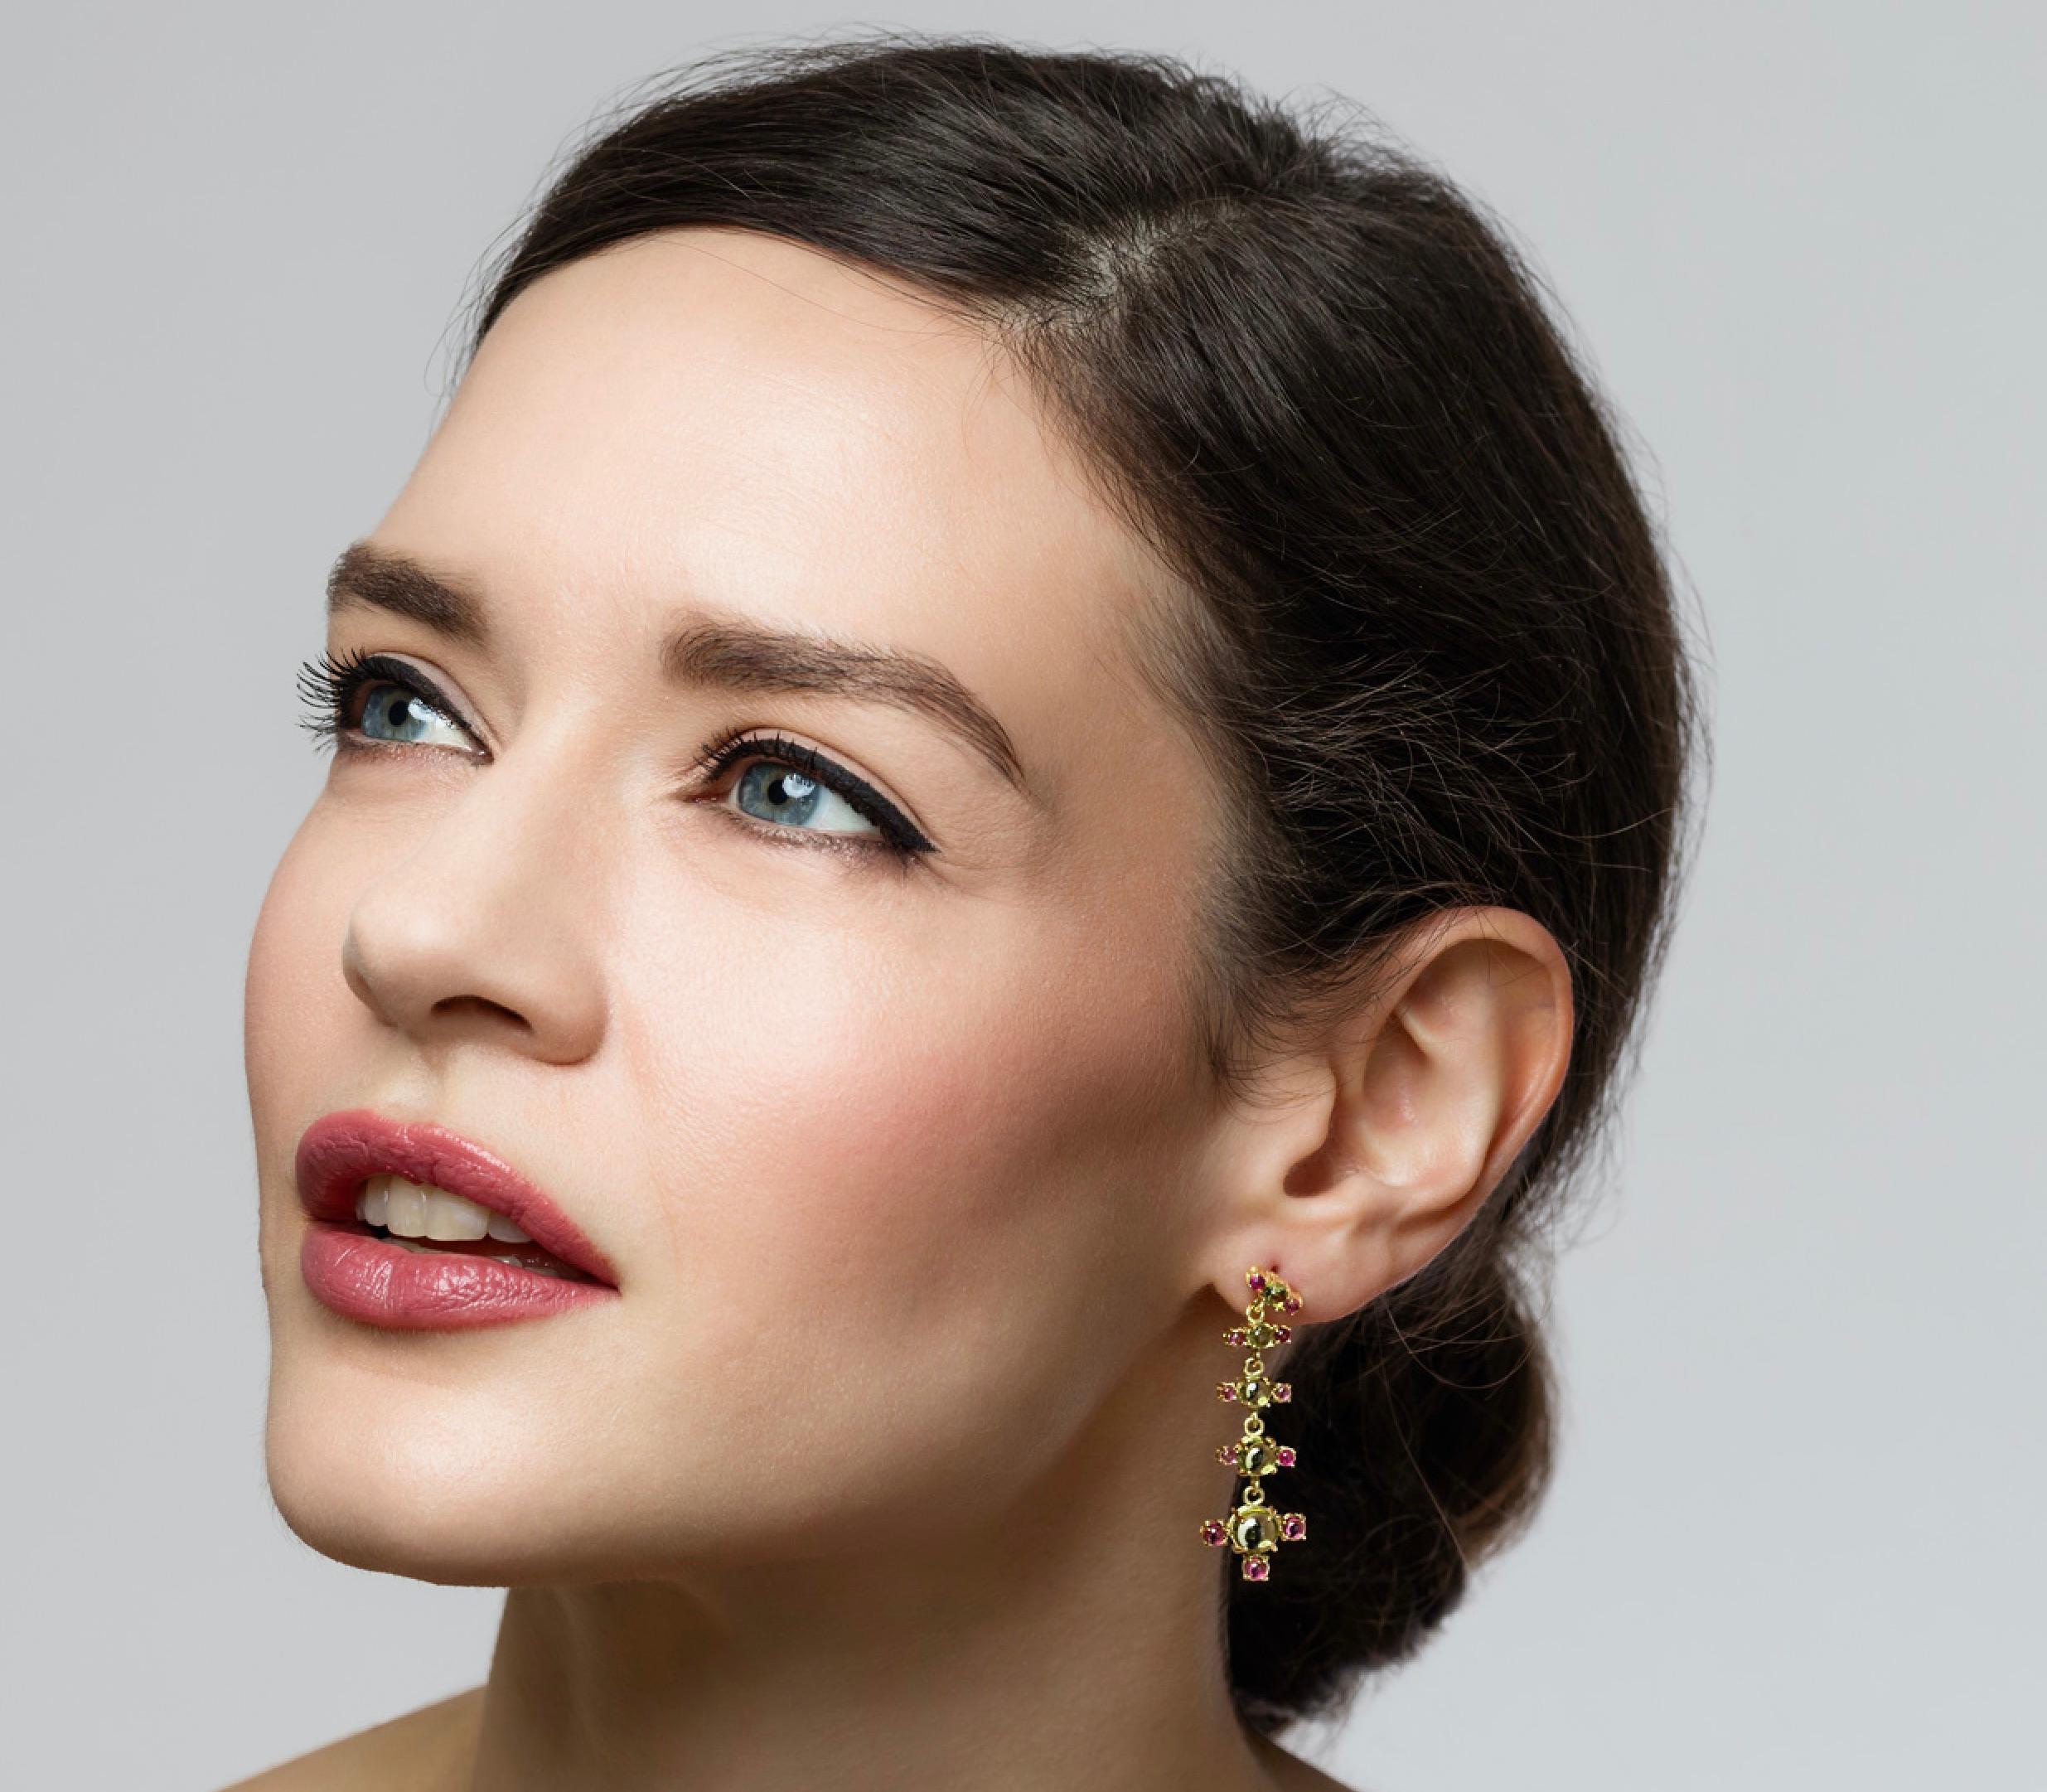 Our + Earrings in 18k yellow gold and brilliant coloured natural gemstone combinations are so feminine and chic. They come in three beautiful coloured combinations: Swiss Blue Topaz and green Peridot, green Peridot and Pink Tourmaline and Purple